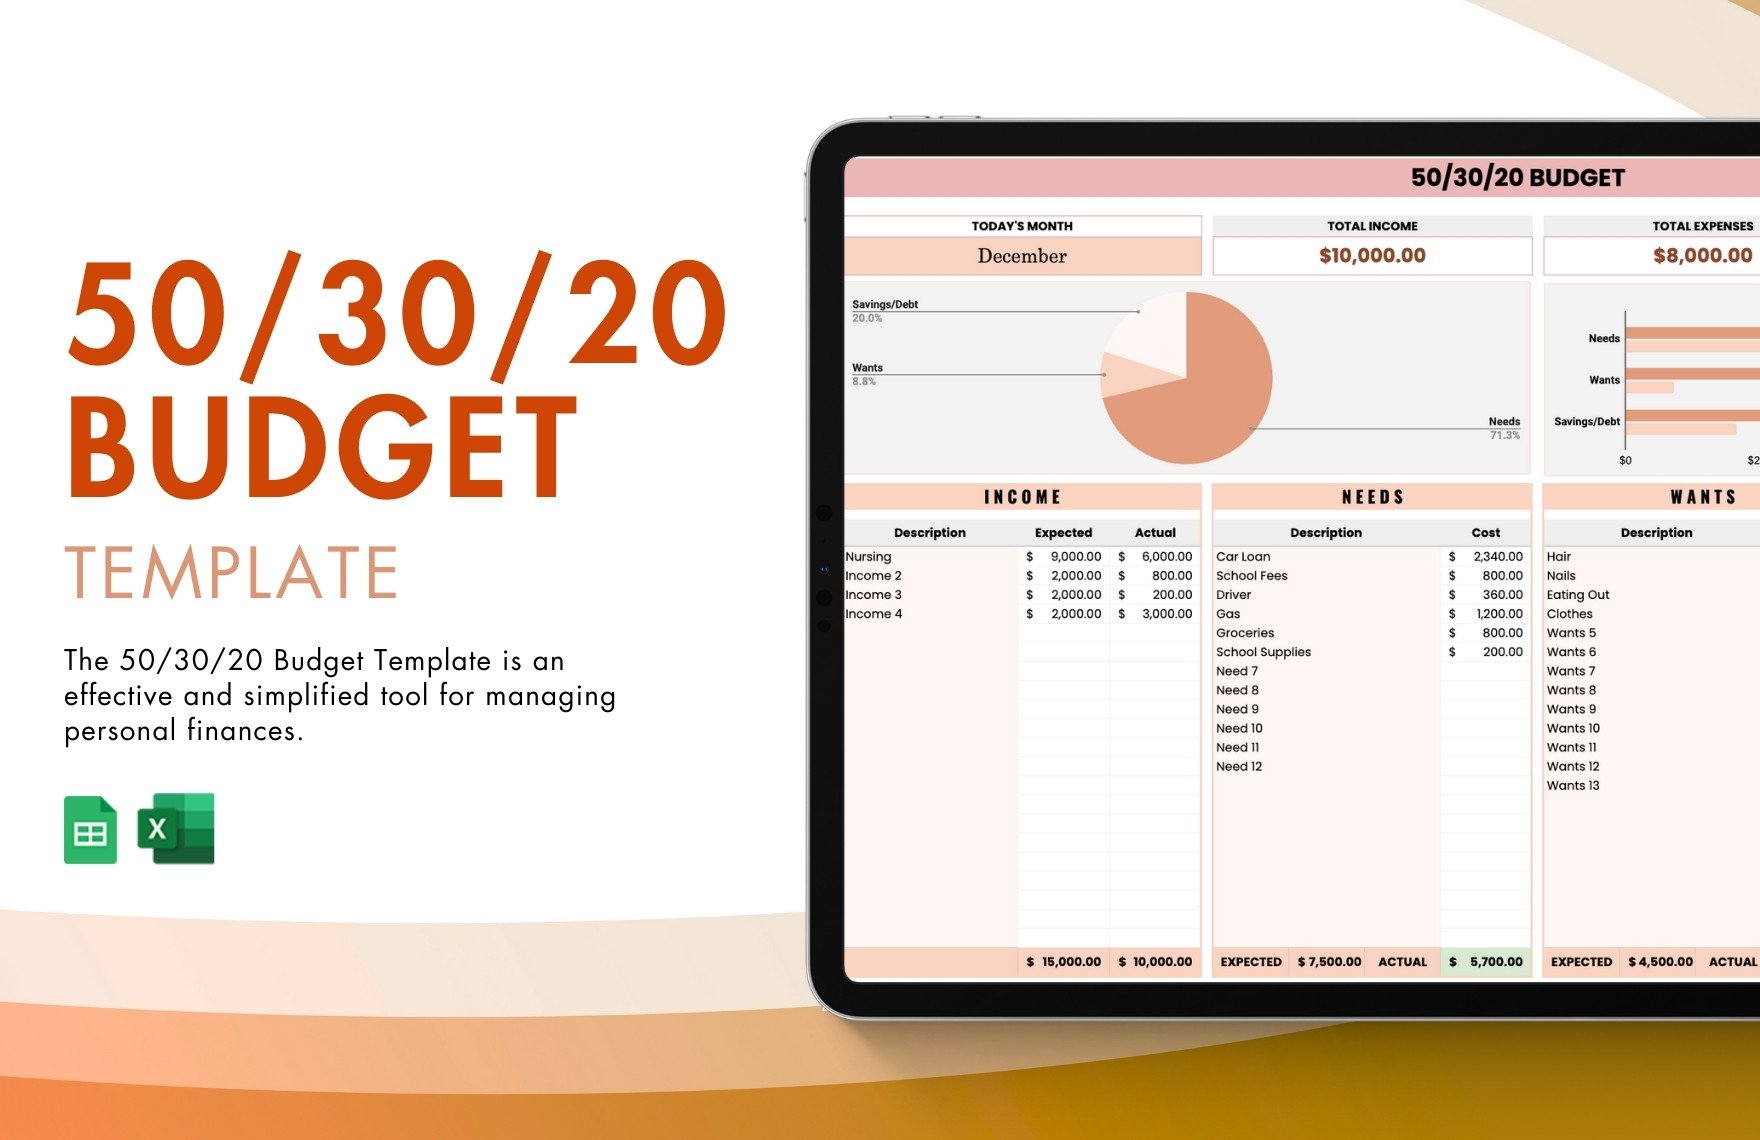 50/30/20 Budget Template in Excel, Google Sheets